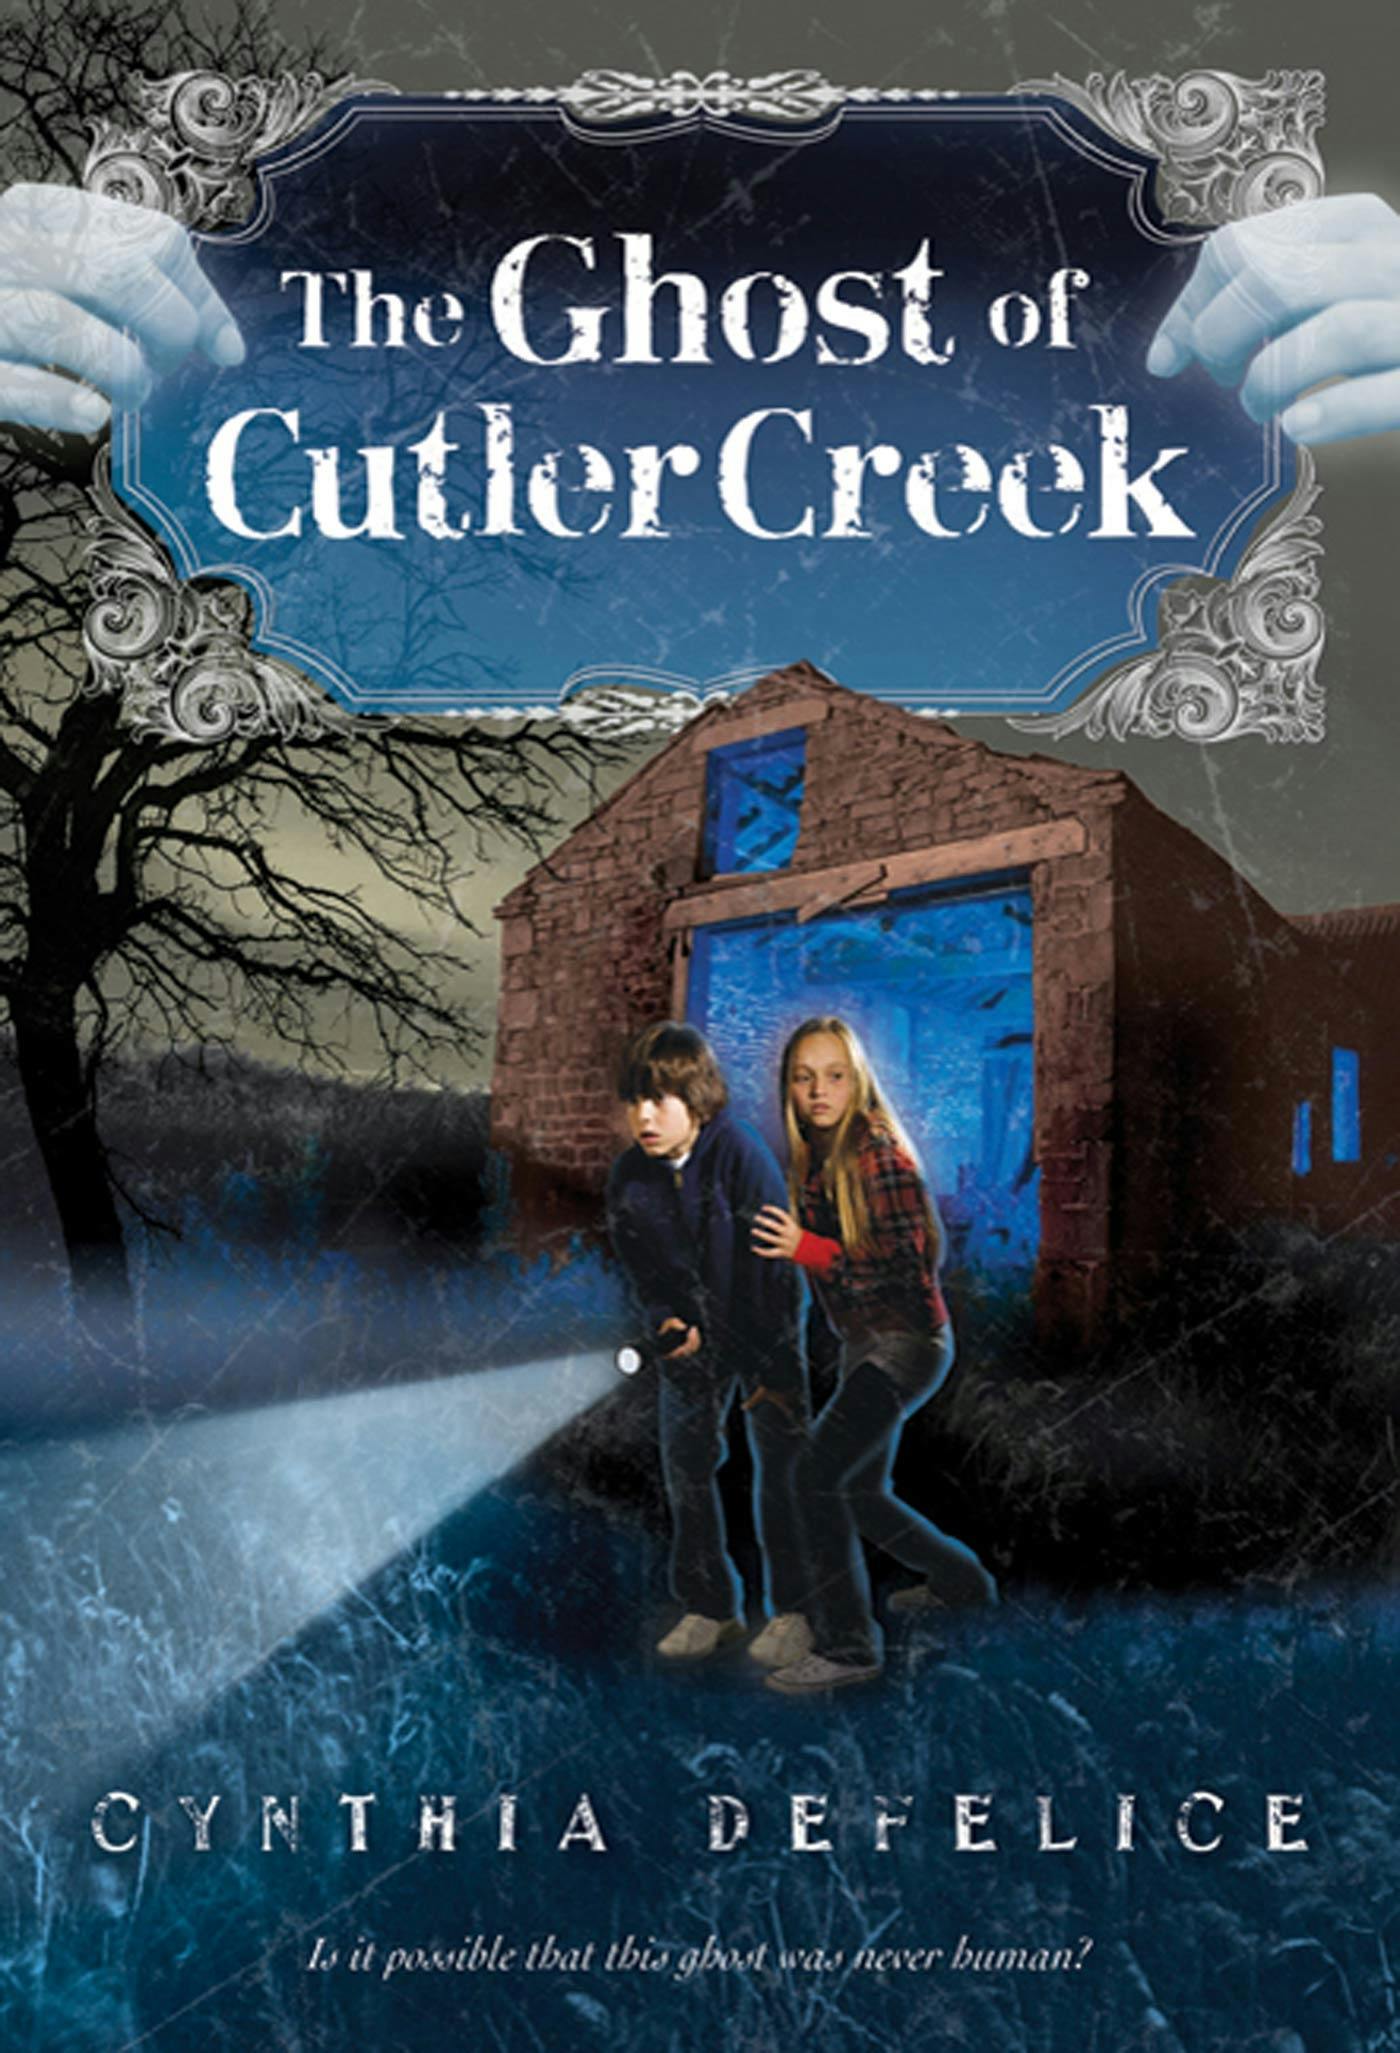 The Ghost of Cutler Creek